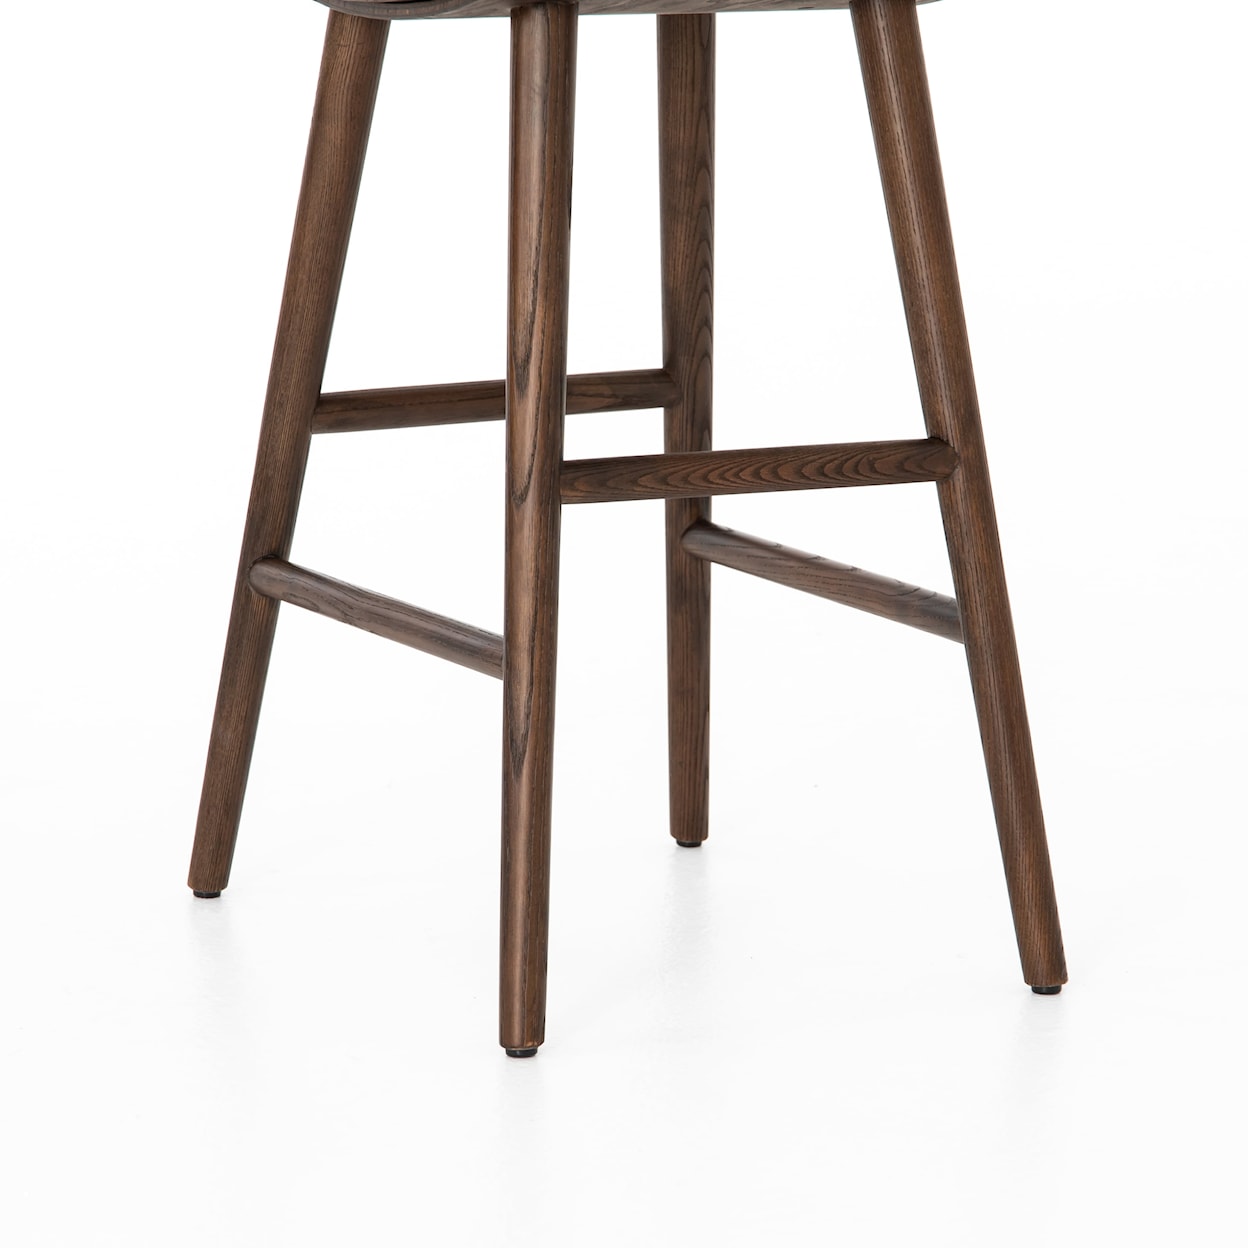 Four Hands Union Saddle Counter Stool